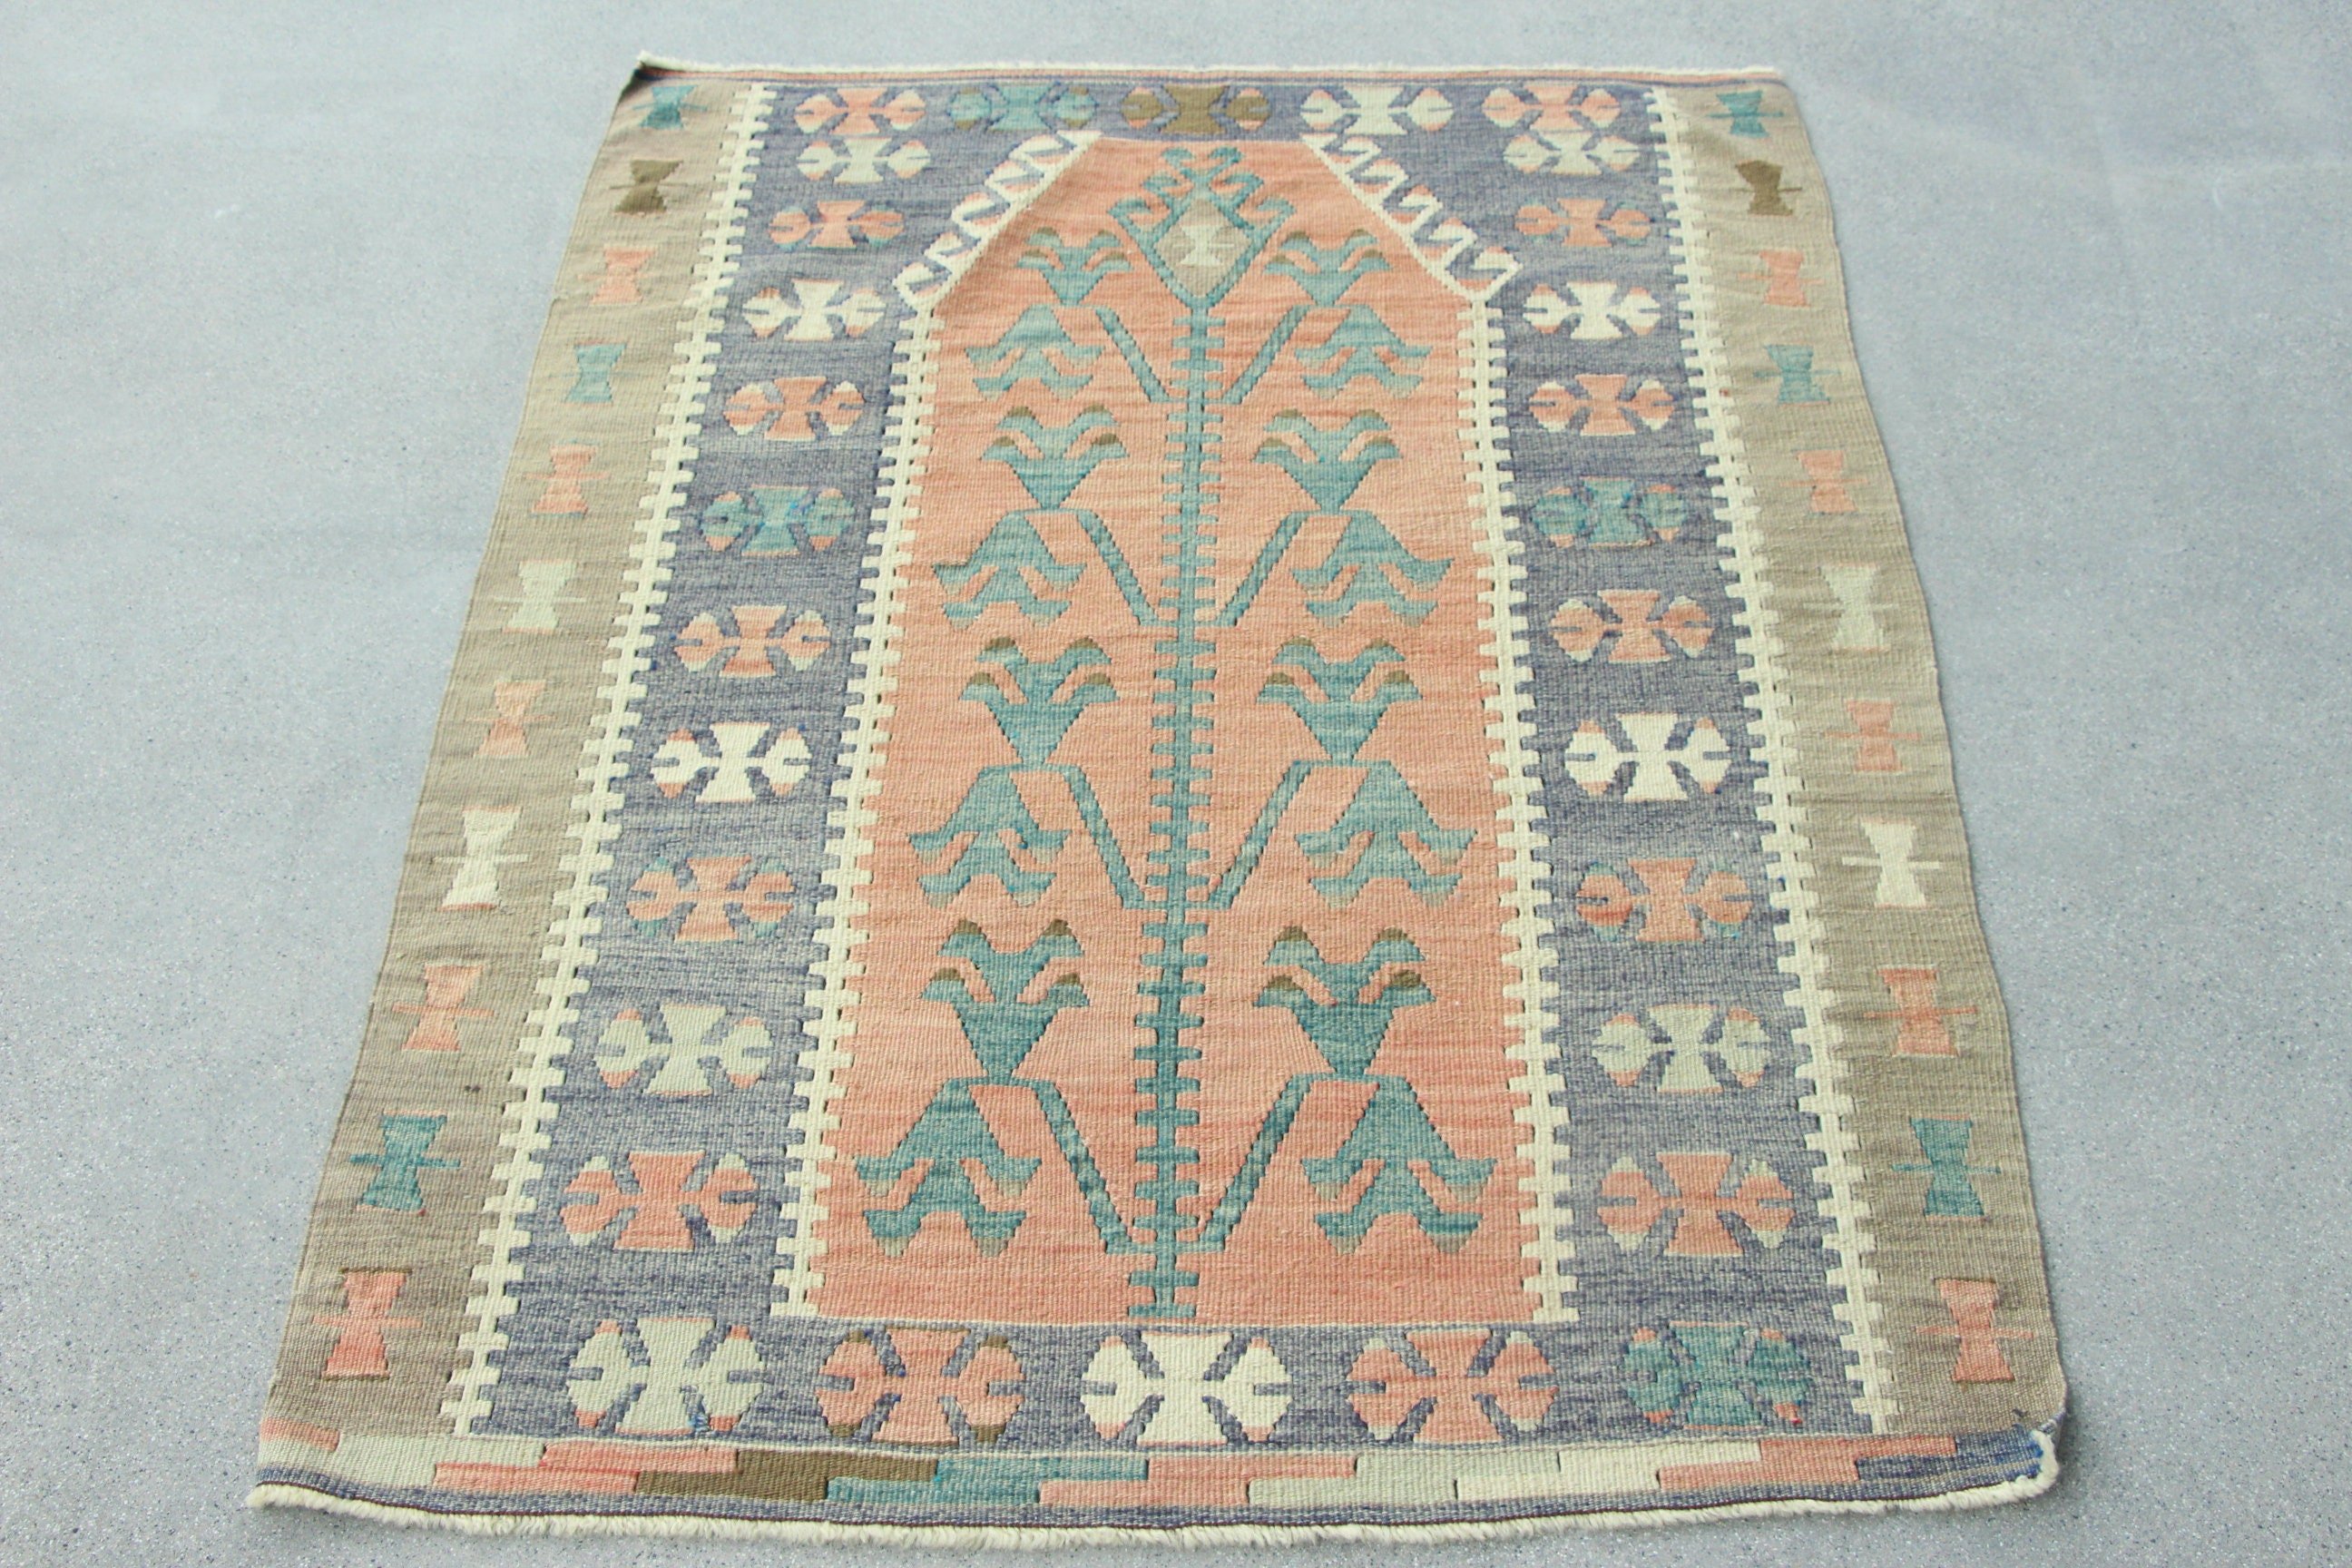 Vintage Rugs, Door Mat Rug, Oushak Rugs, Home Decor Rug, Rugs for Bath, Beige Cool Rugs, Kitchen Rugs, Turkish Rug, 3x3.9 ft Small Rugs